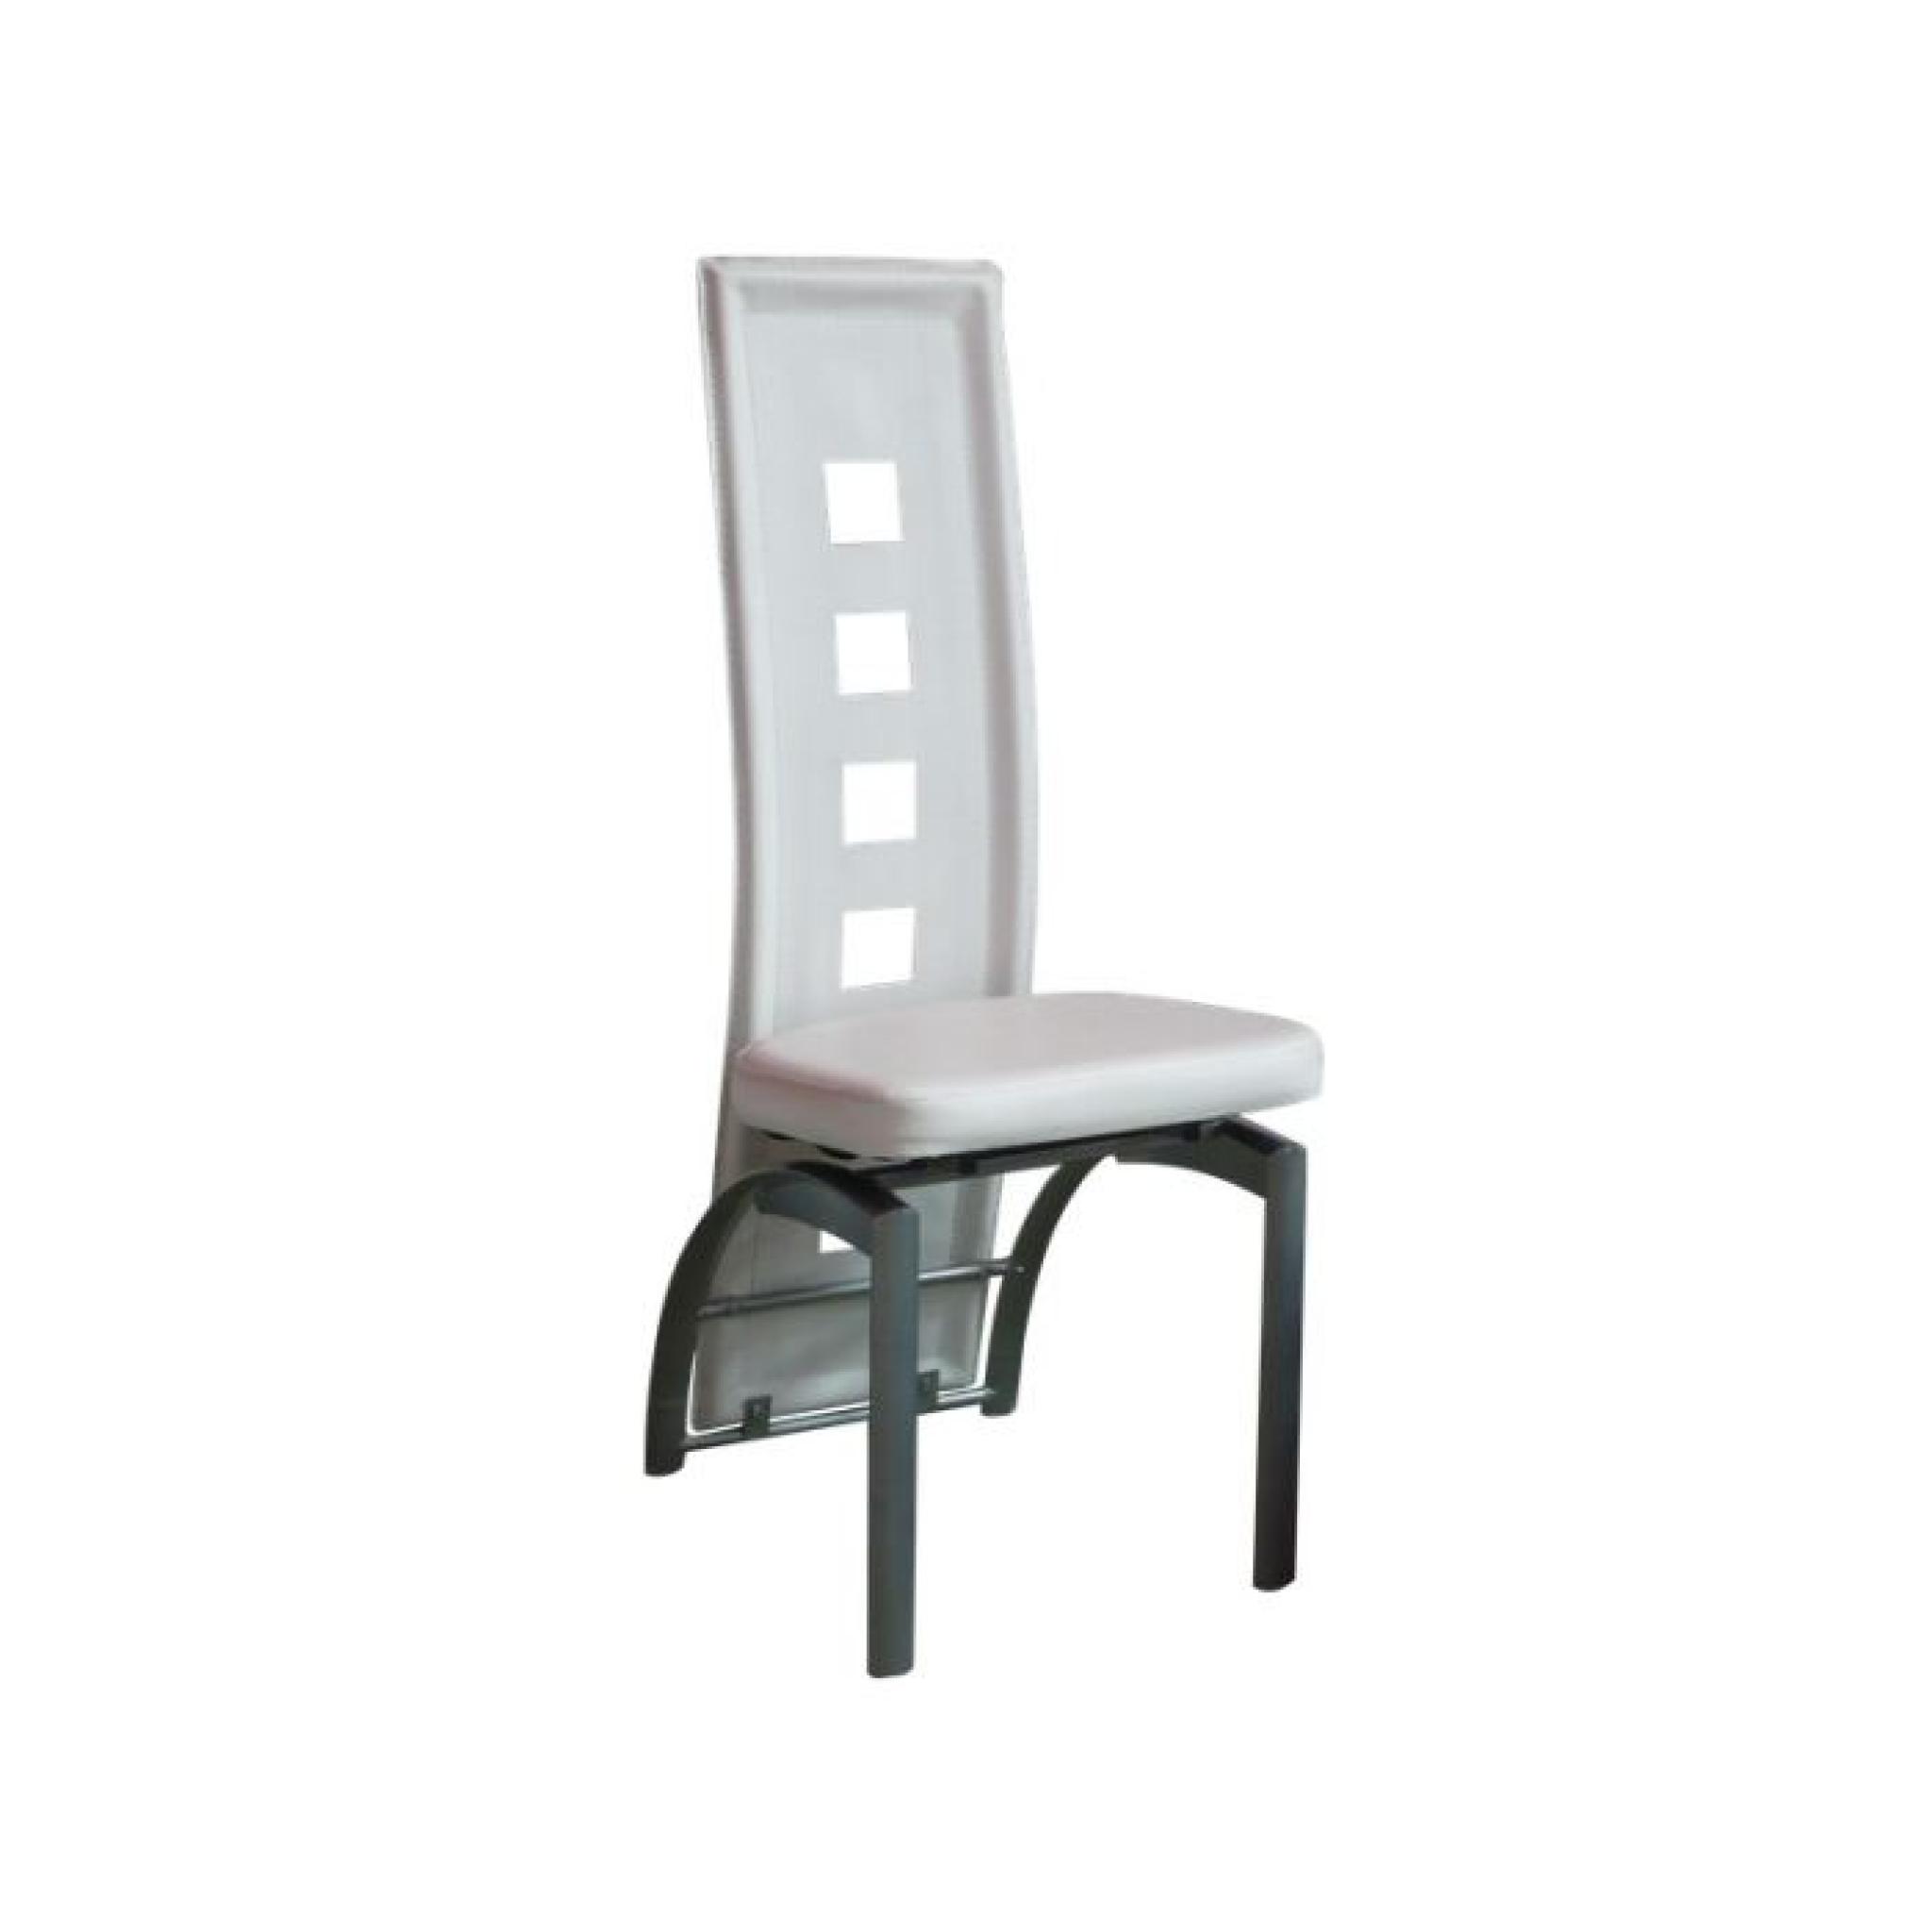 Eve - Lot 2 Chaises Blanches pas cher